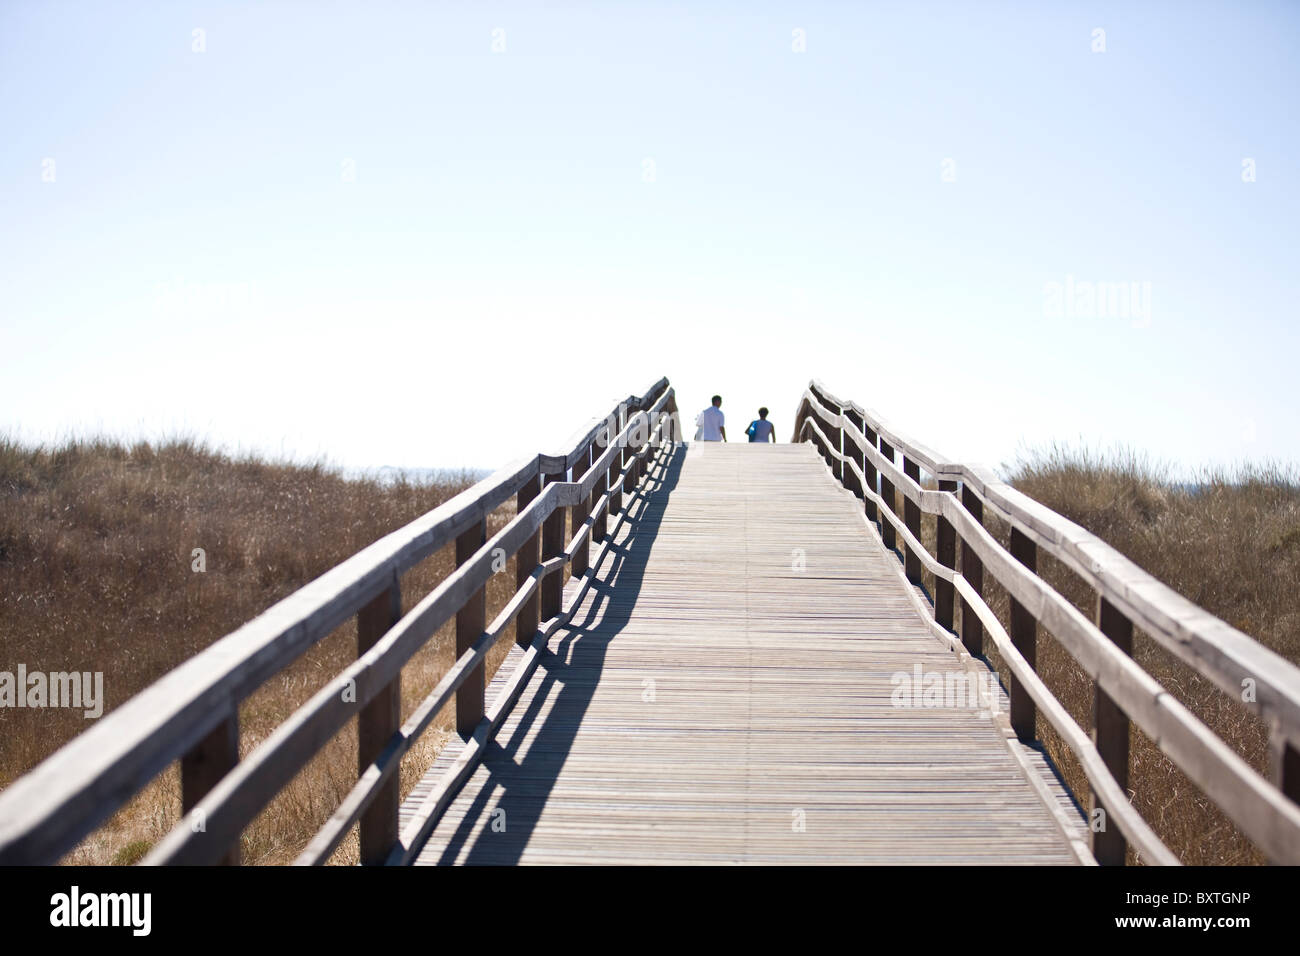 A wooden bridge over sand dunes, two people in the distance Stock Photo